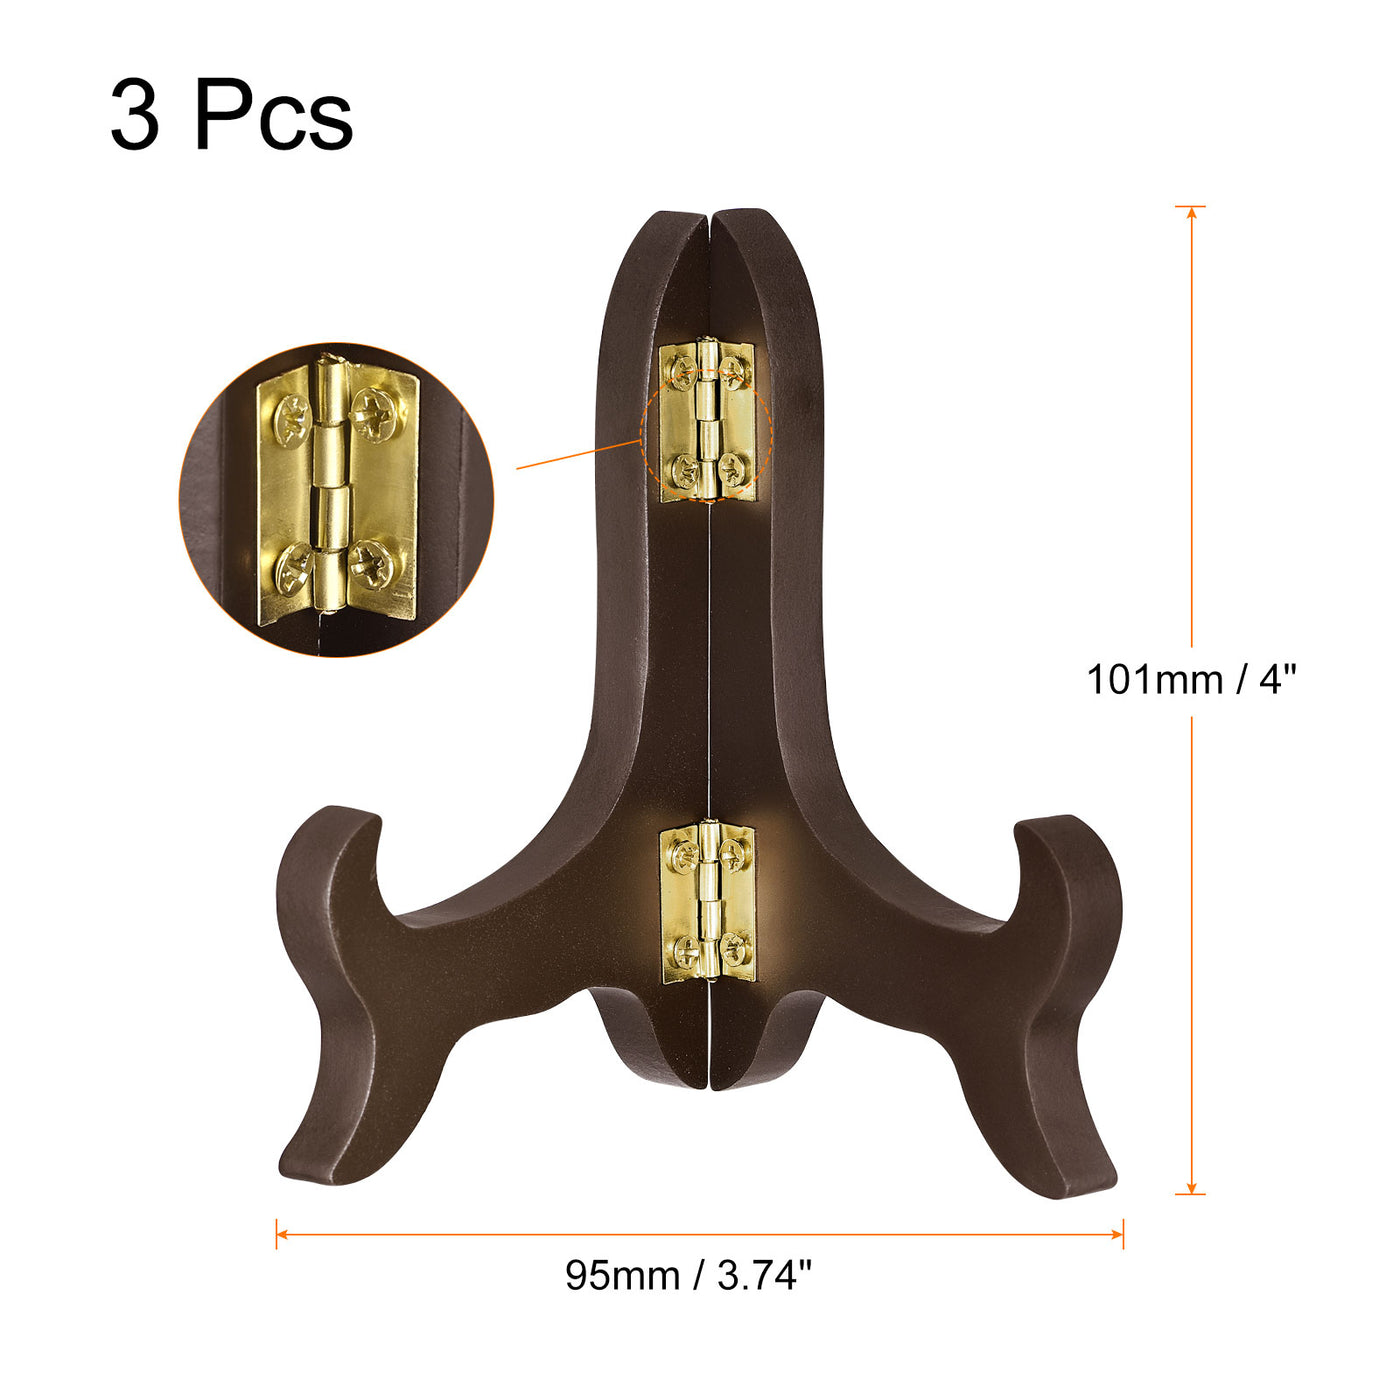 uxcell Uxcell 3pcs 4" Easel Plate Holder, Wooden Folding Display Stand Brown for Decorative Picture Frame